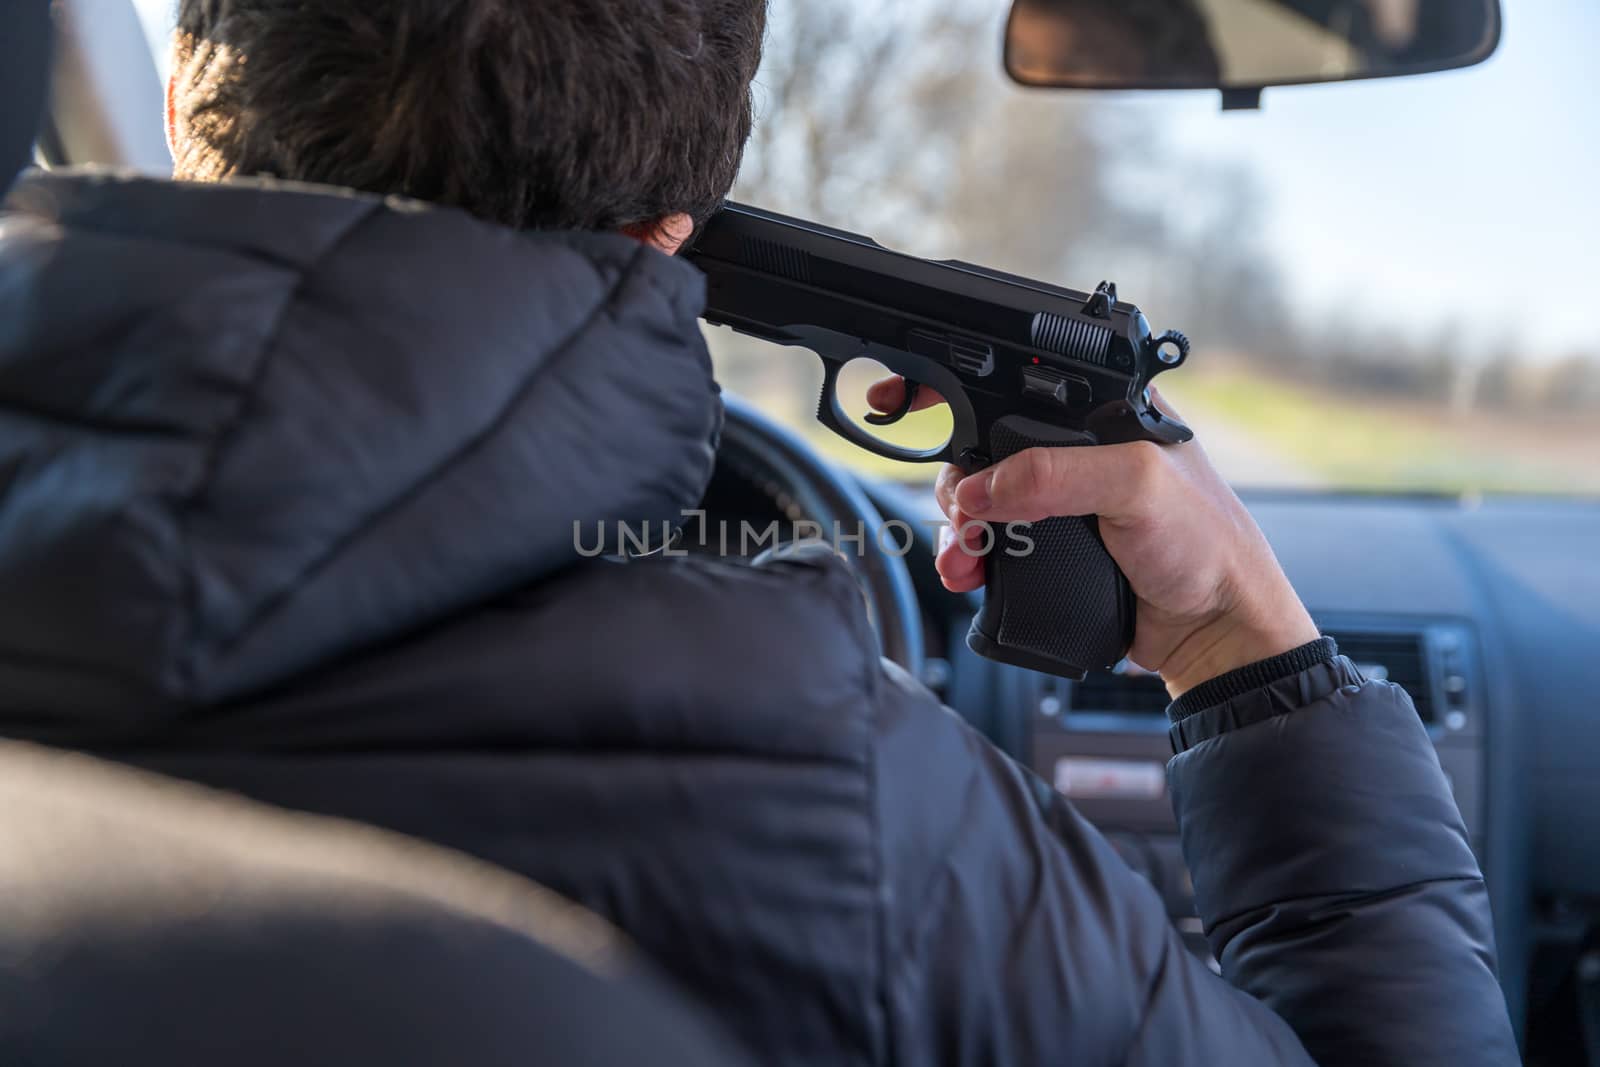 a man aiming a gun at his own head playing Russian roulette or killing himself by Edophoto